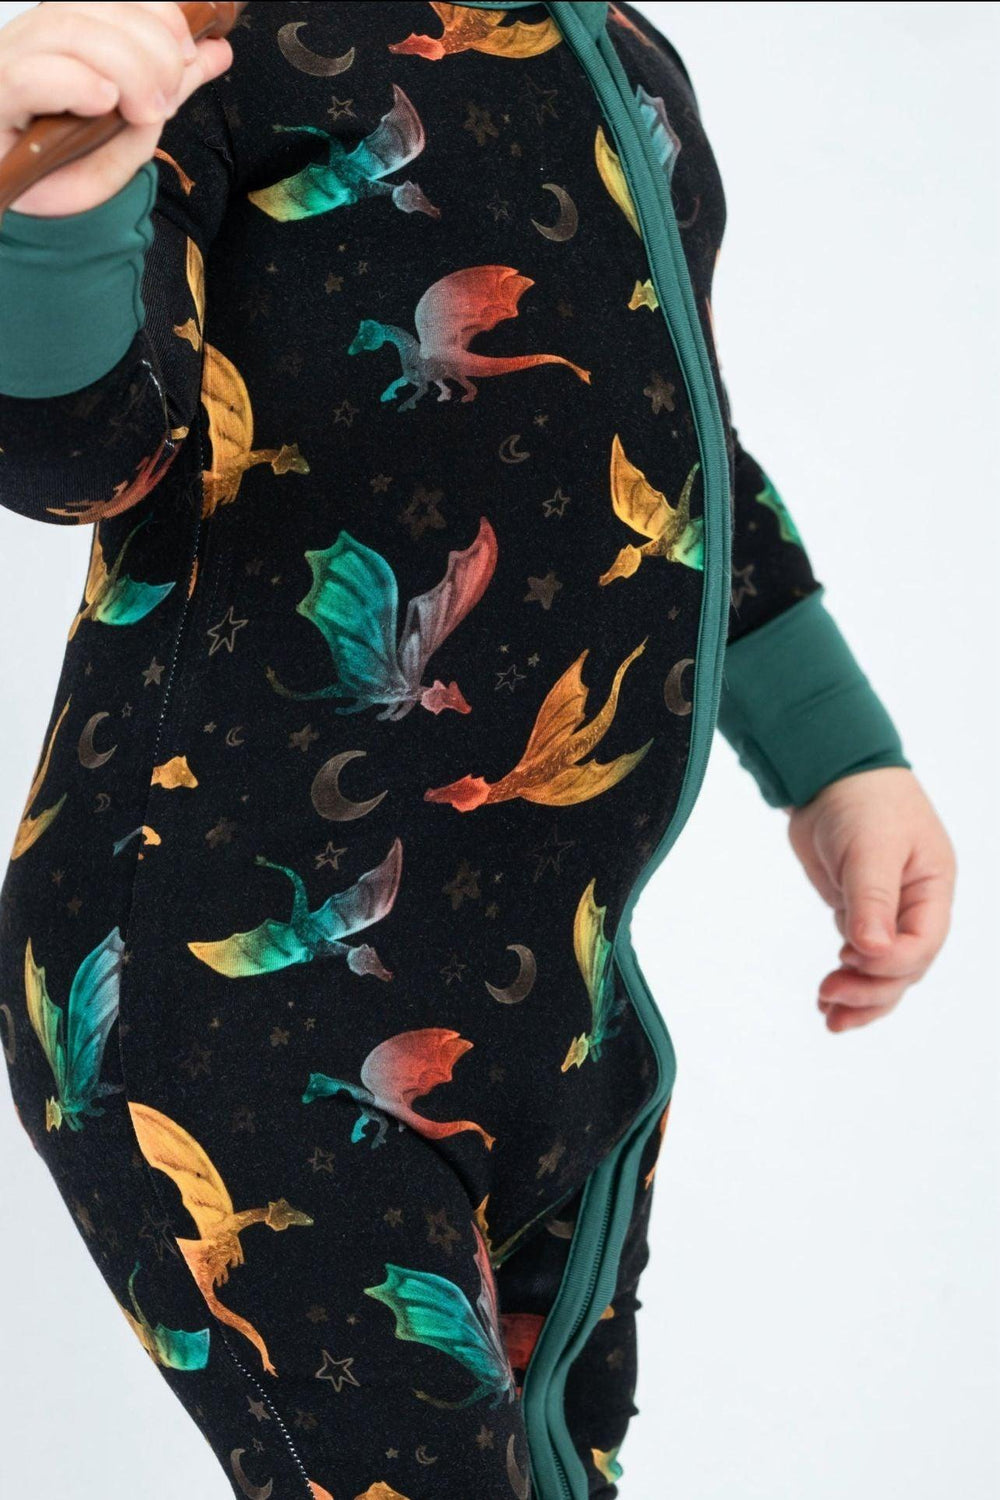 Dragon Print Bamboo Zip-Up One-Piece Pajamas for Babies & Toddlers